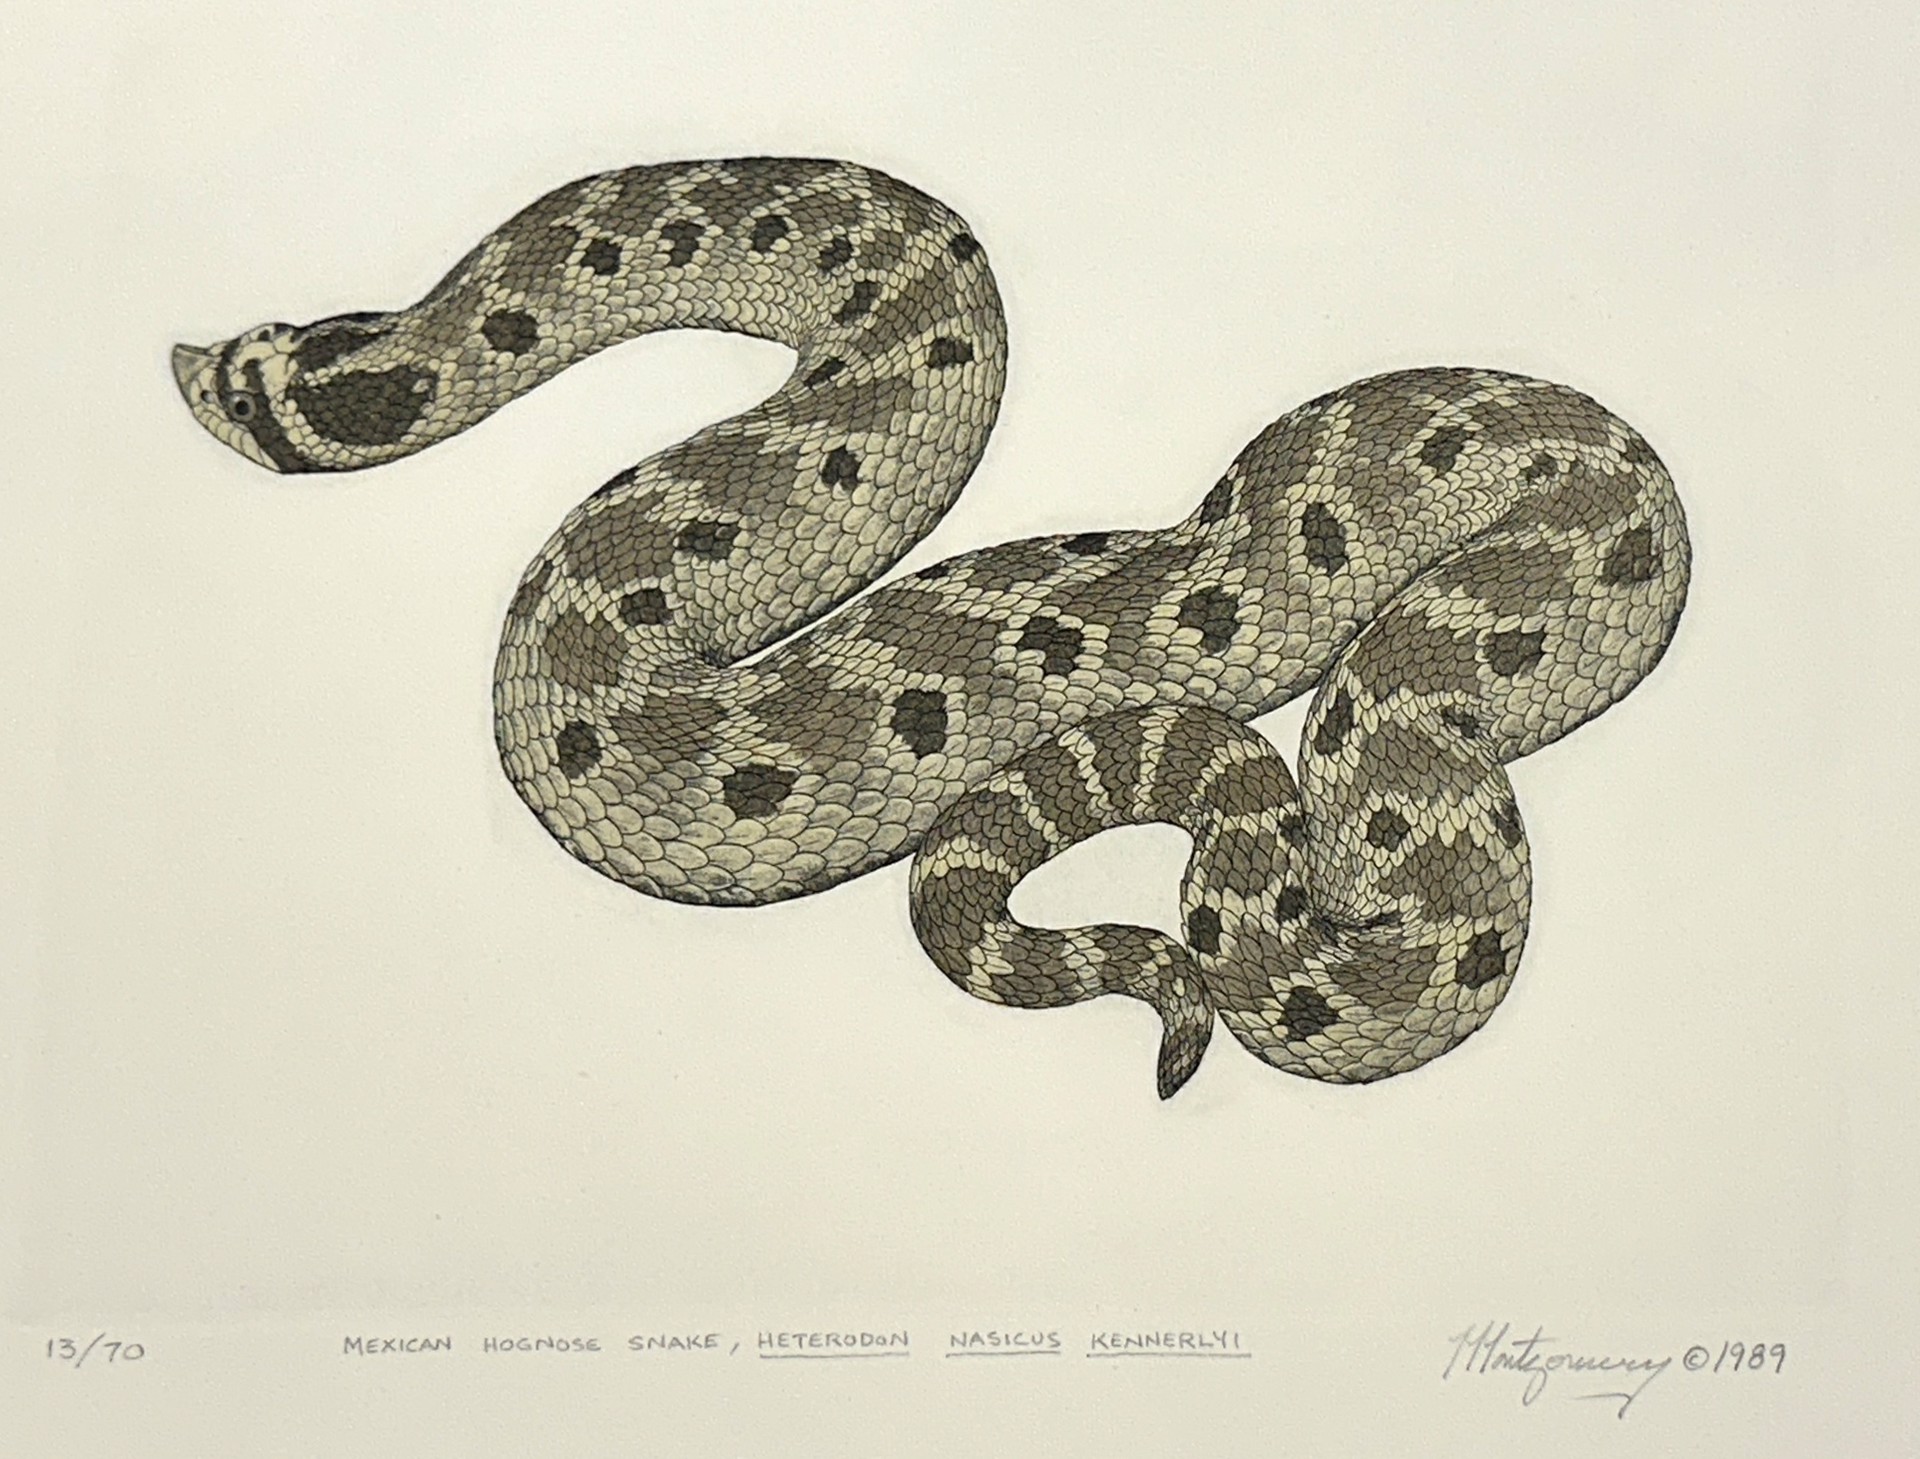 Mexican Hognose Snake by William Montgomery